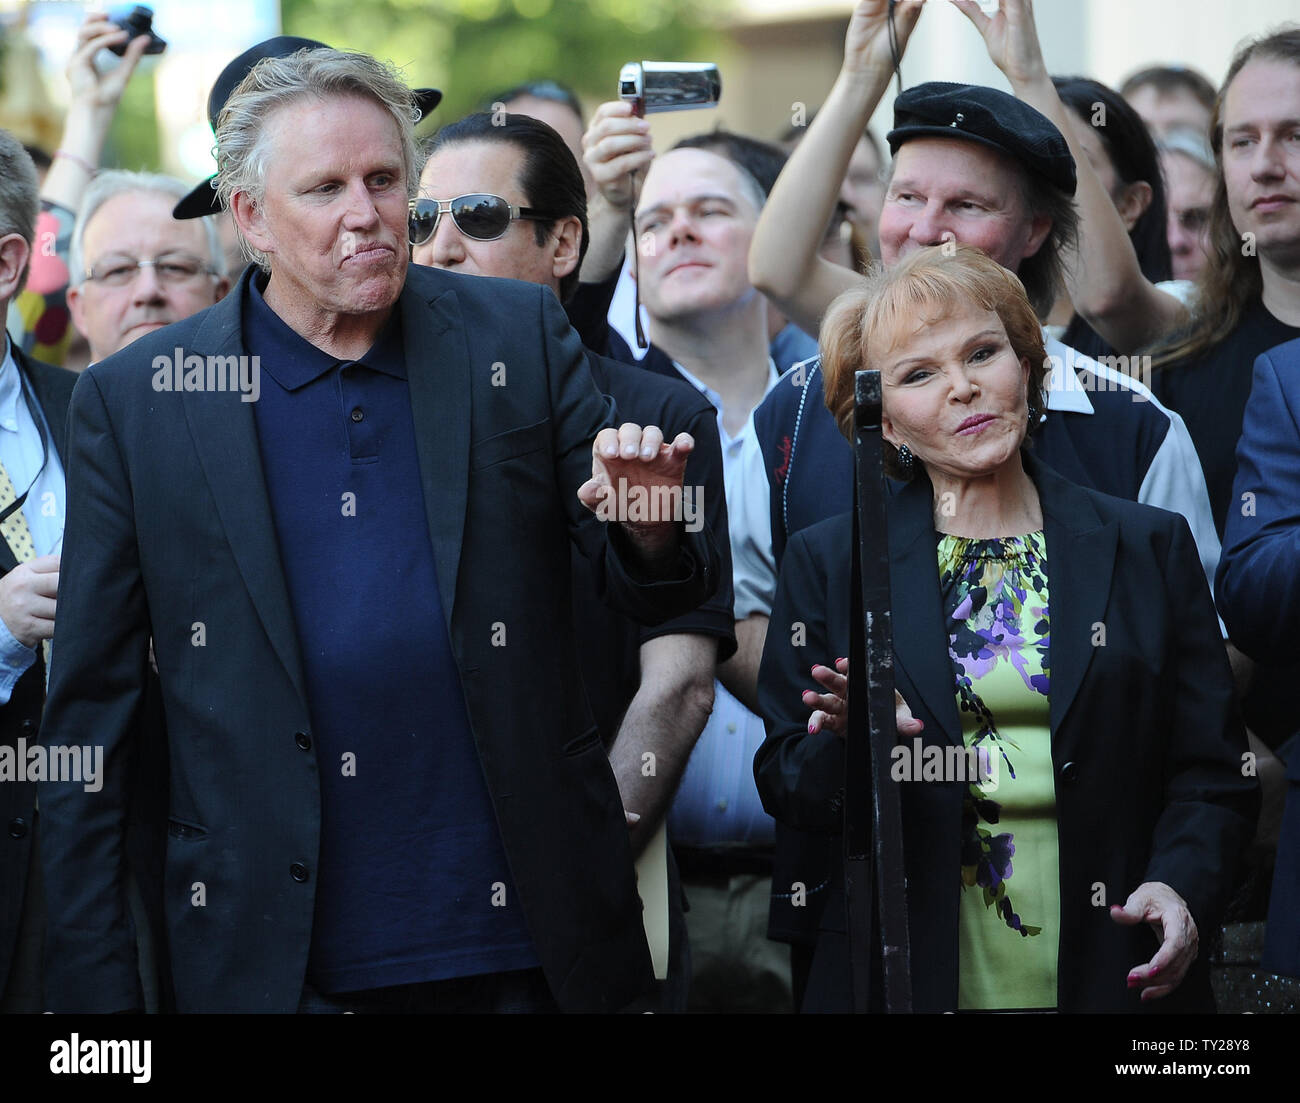 The late Buddy Holly received a posthumous star on Hollywood's Walk of Fame on his 75th birthday on Vine Street in front of The Capitol Records Building in Los Angeles on September 7, 2011.  Gary Busey and Maria Elena Holly wait for their turn to speak at the event.  UPI/Jayne Kamin-Oncea Stock Photo